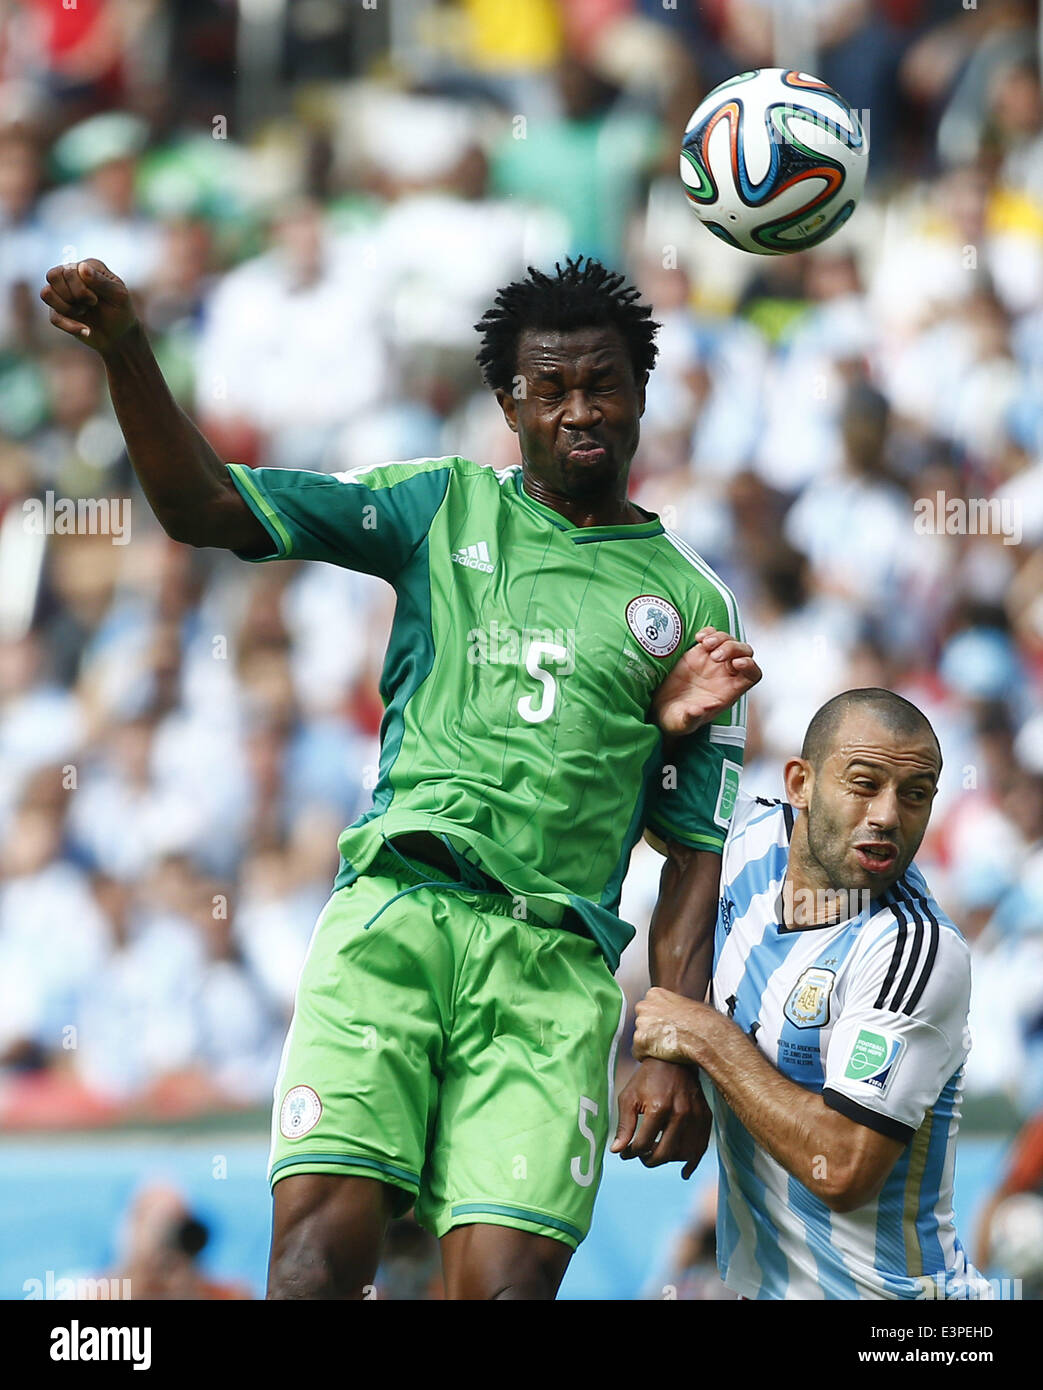 Porto Alegre, Brazil. 25th June, 2014. Nigeria's Efe Ambrose (L) competes for a header with Argentina's Javier Mascherano during a Group F match between Nigeria and Argentina of 2014 FIFA World Cup at the Estadio Beira-Rio Stadium in Porto Alegre, Brazil, on June 25, 2014. © Chen Jianli/Xinhua/Alamy Live News Stock Photo